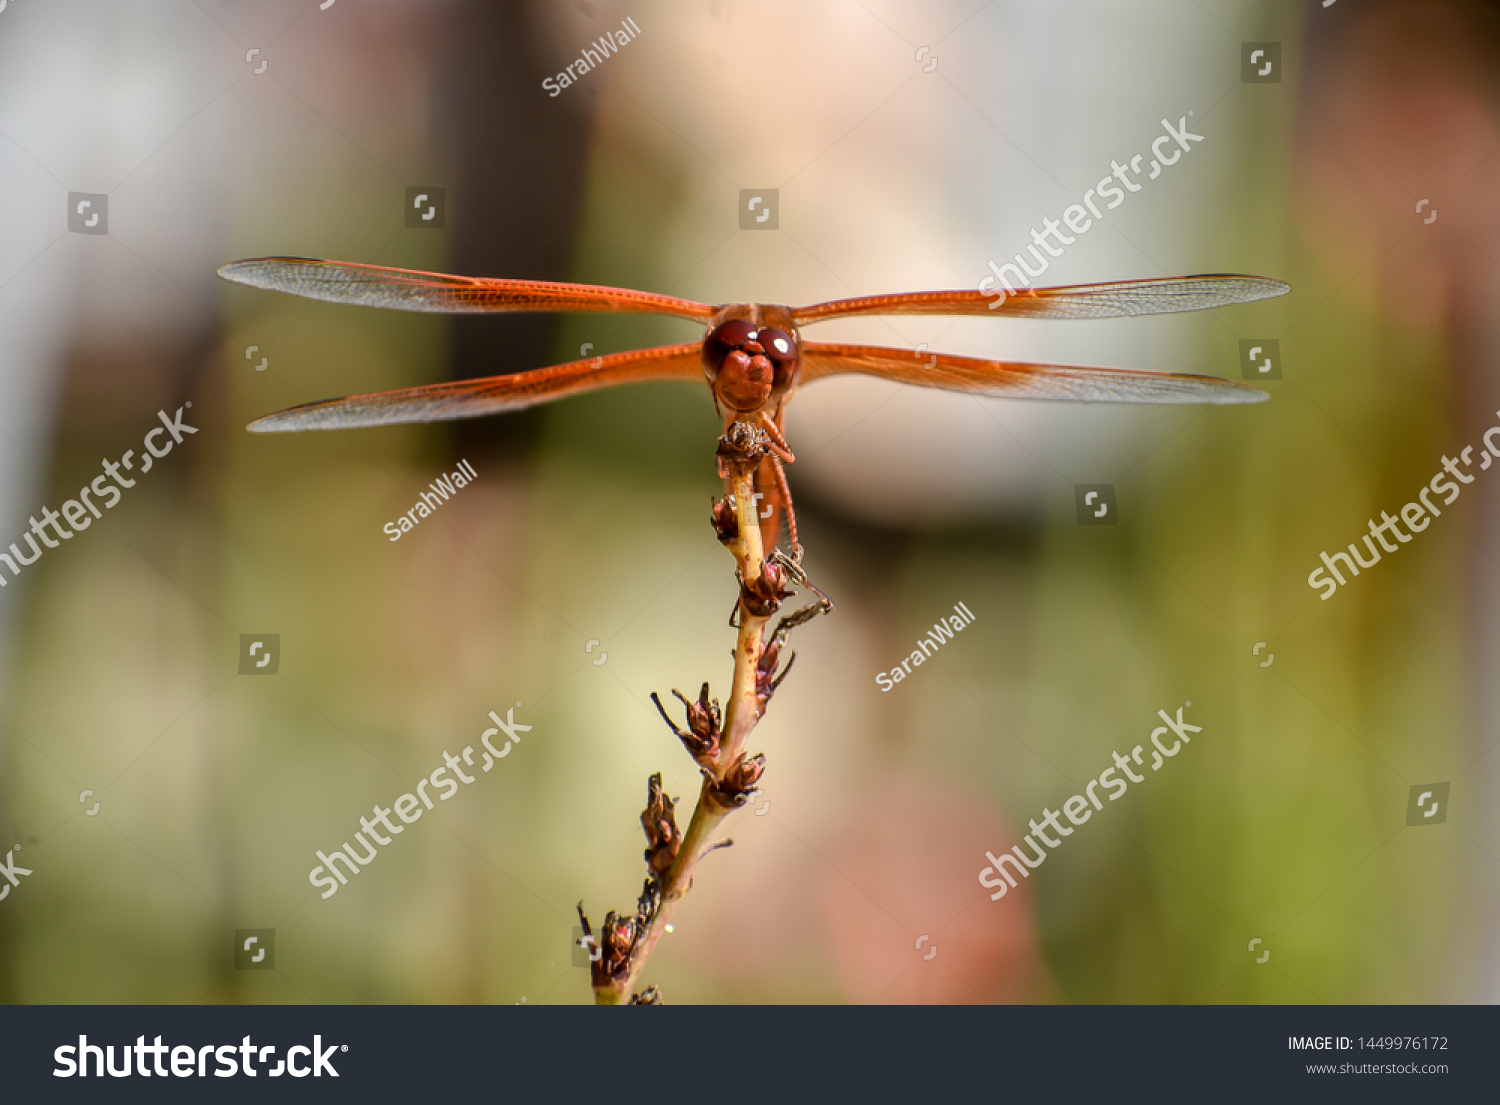 Dragonfly on a yucca plant #1449976172